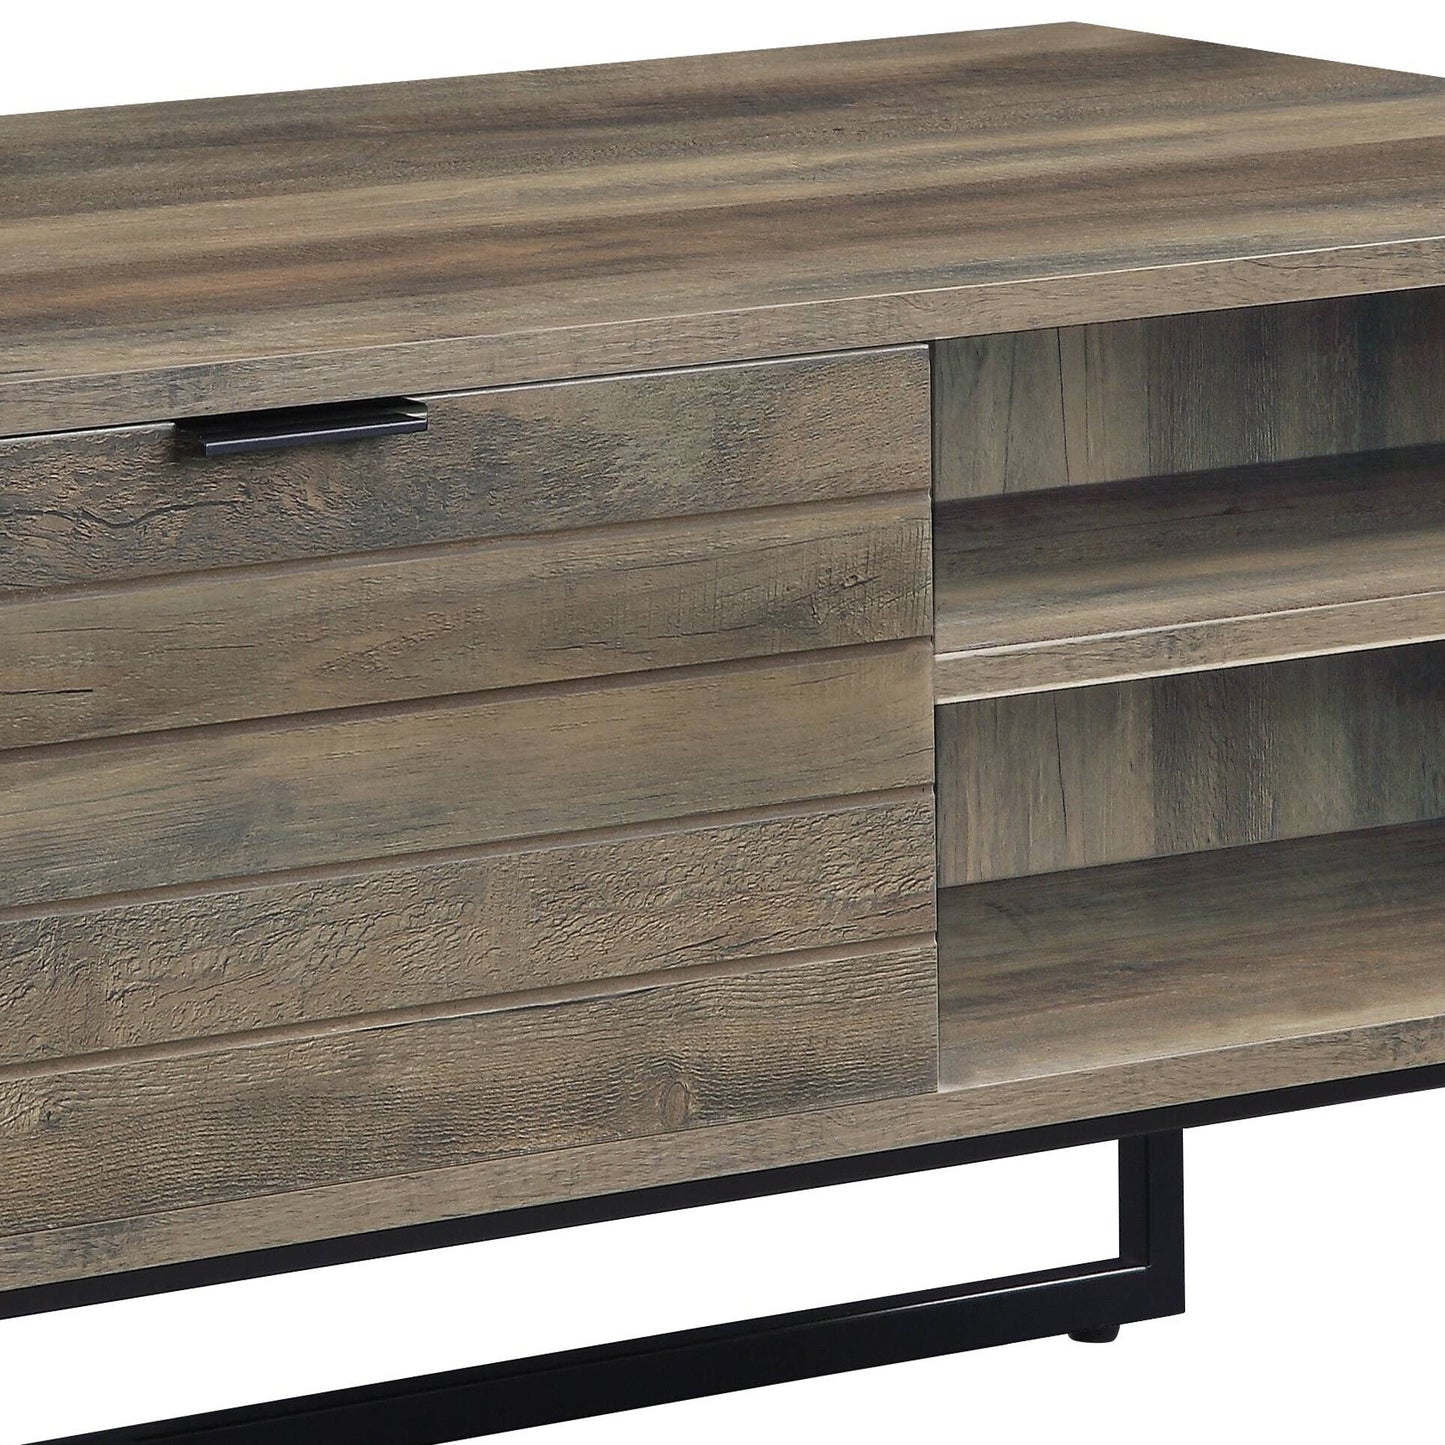 Rustic Oak and Black Coffee Table with Open Storage